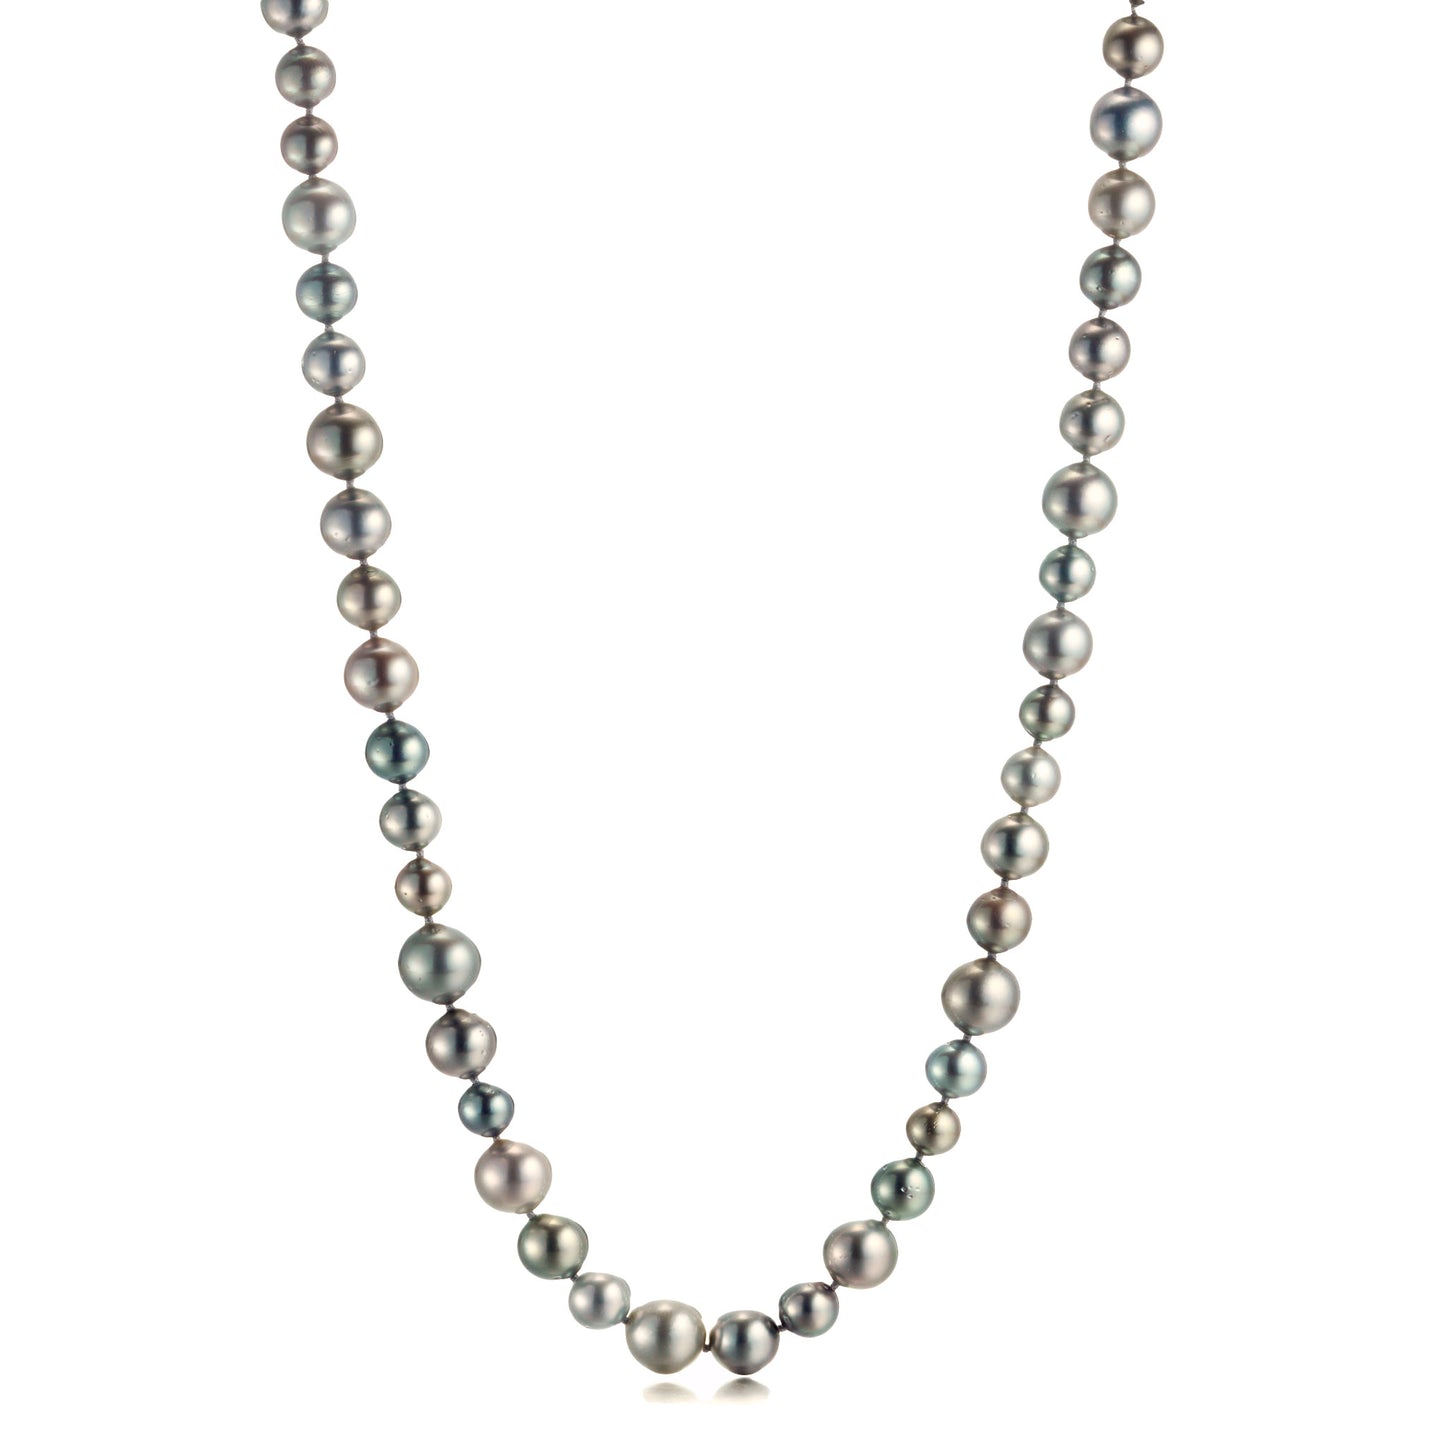 8-13mm Multi-Size Gray Tahitian Pearl Long Necklace